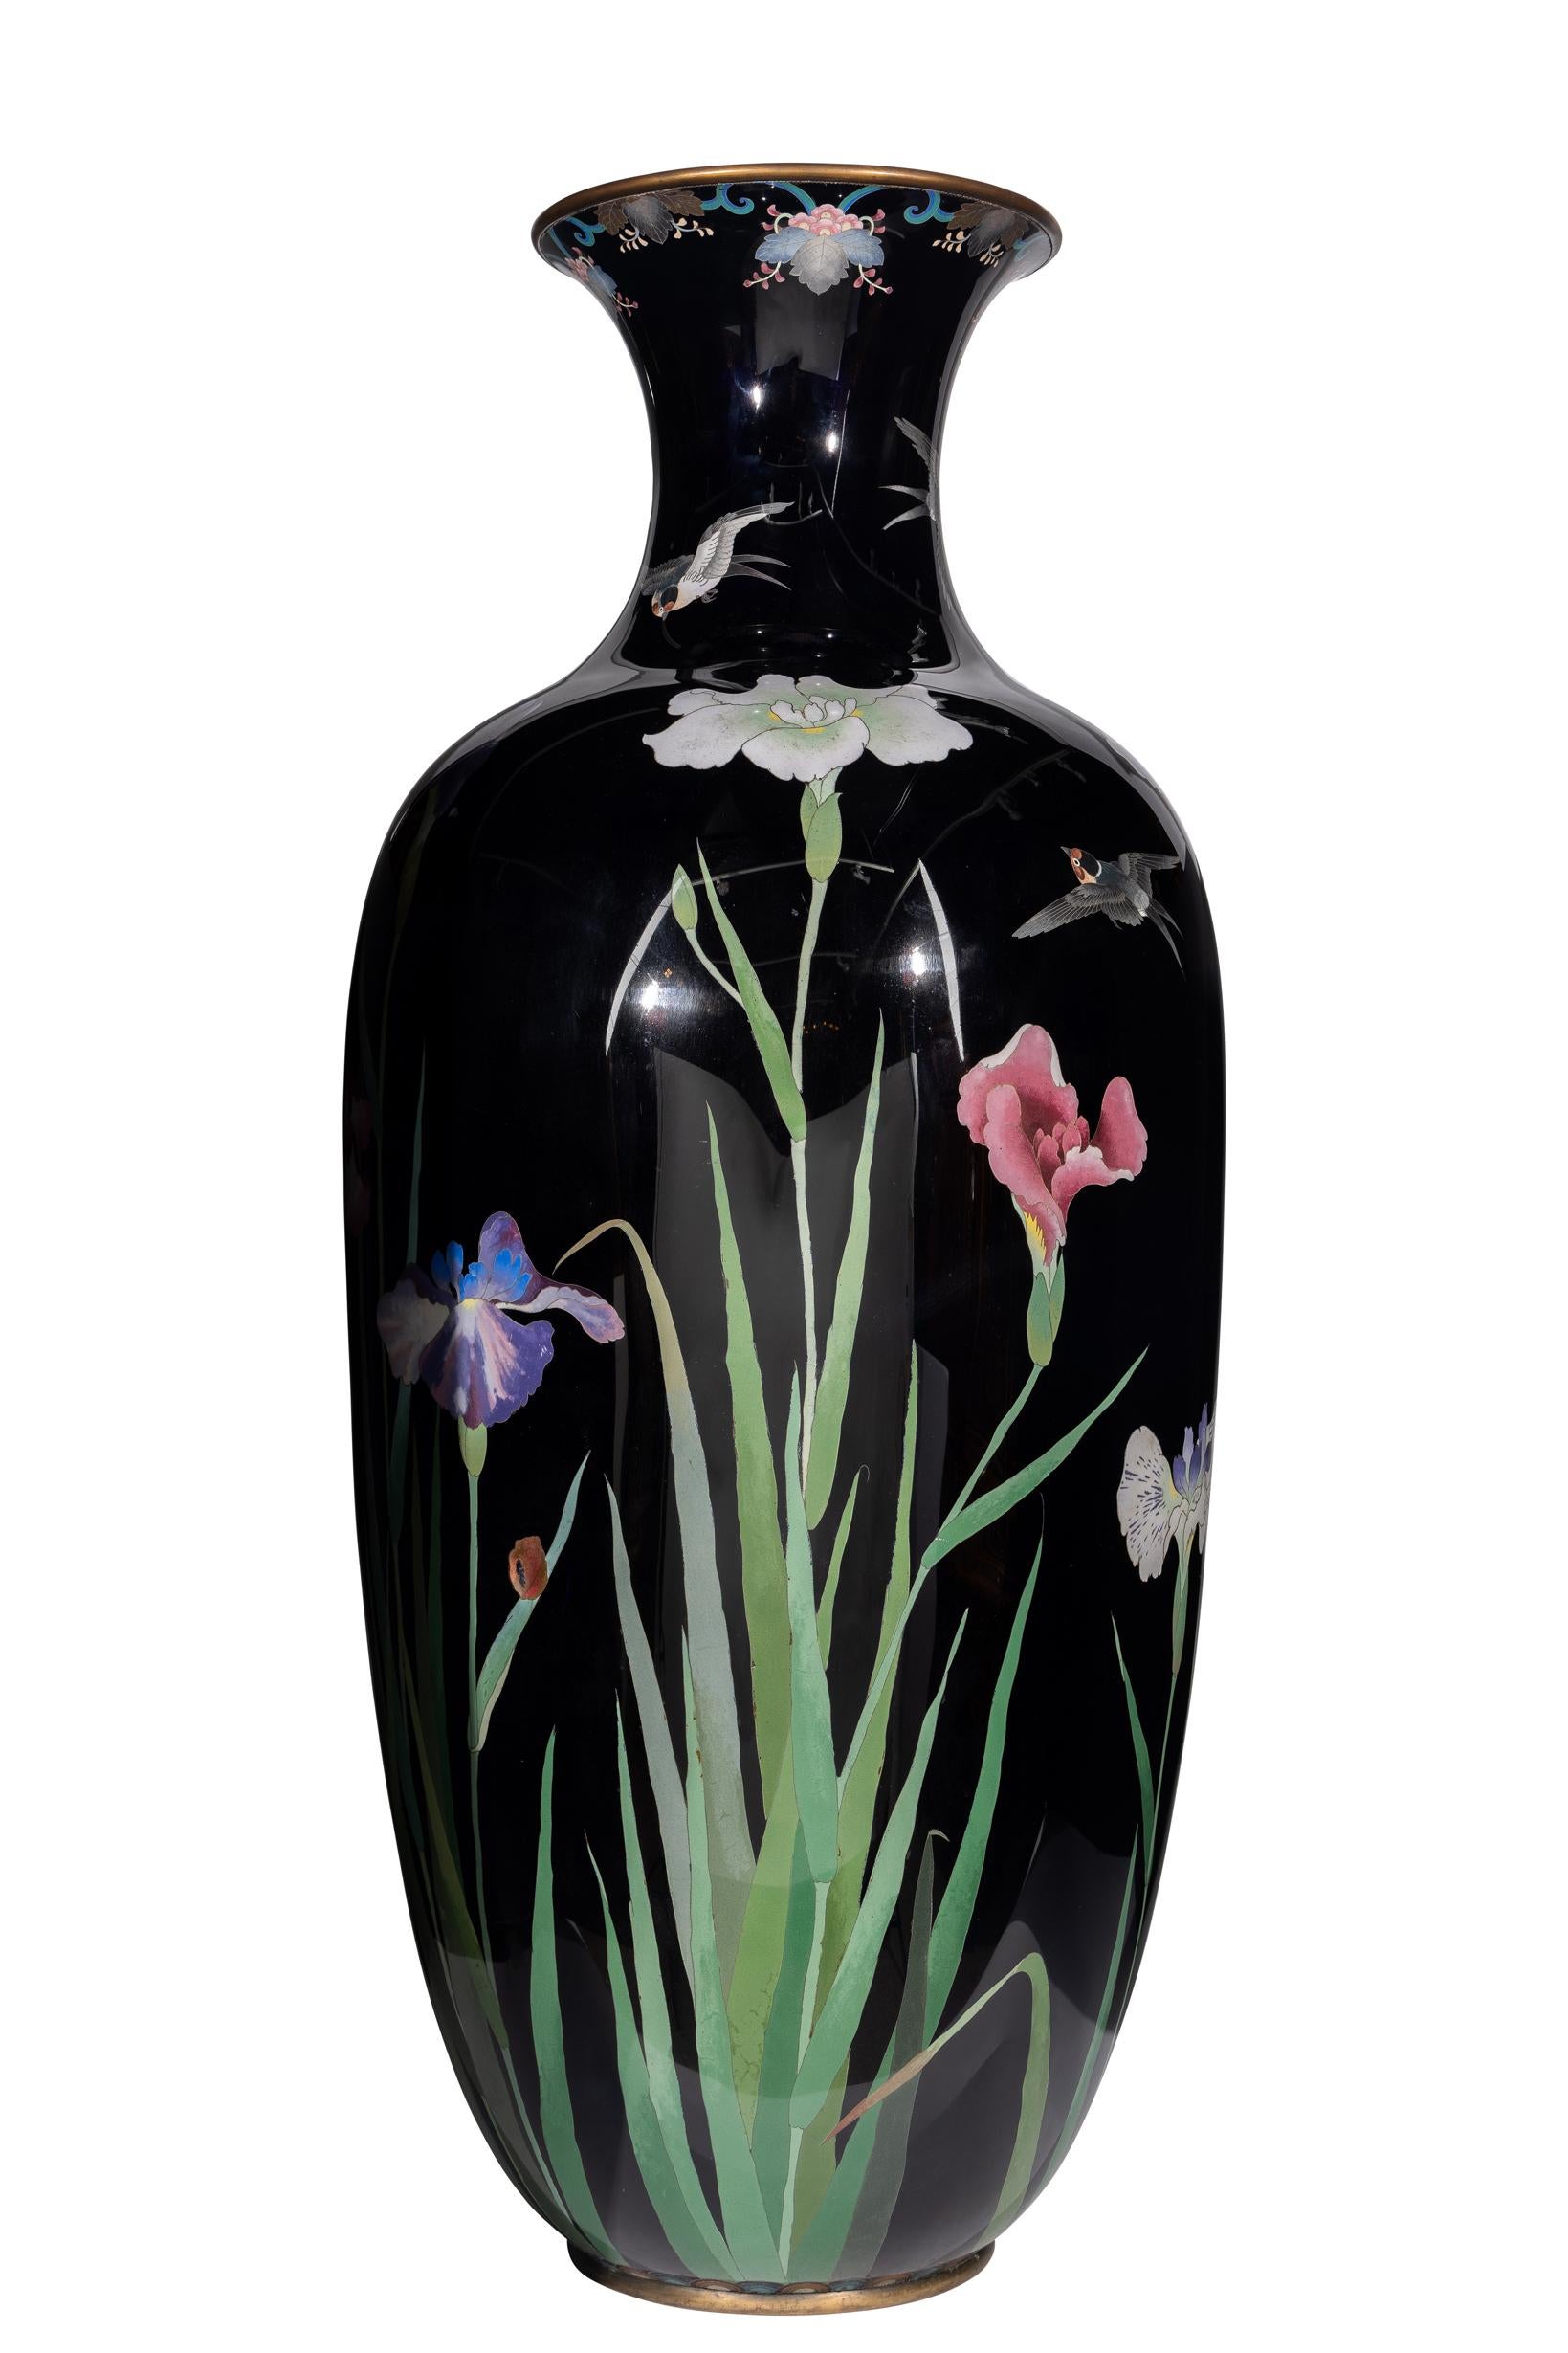 Introducing a truly magnificent Palace-Sized Japanese Cloisonné Enamel Vase adorned with exquisite irises and graceful sparrows. This extraordinary vase showcases the epitome of Japanese cloisonné craftsmanship, capturing the essence of nature's